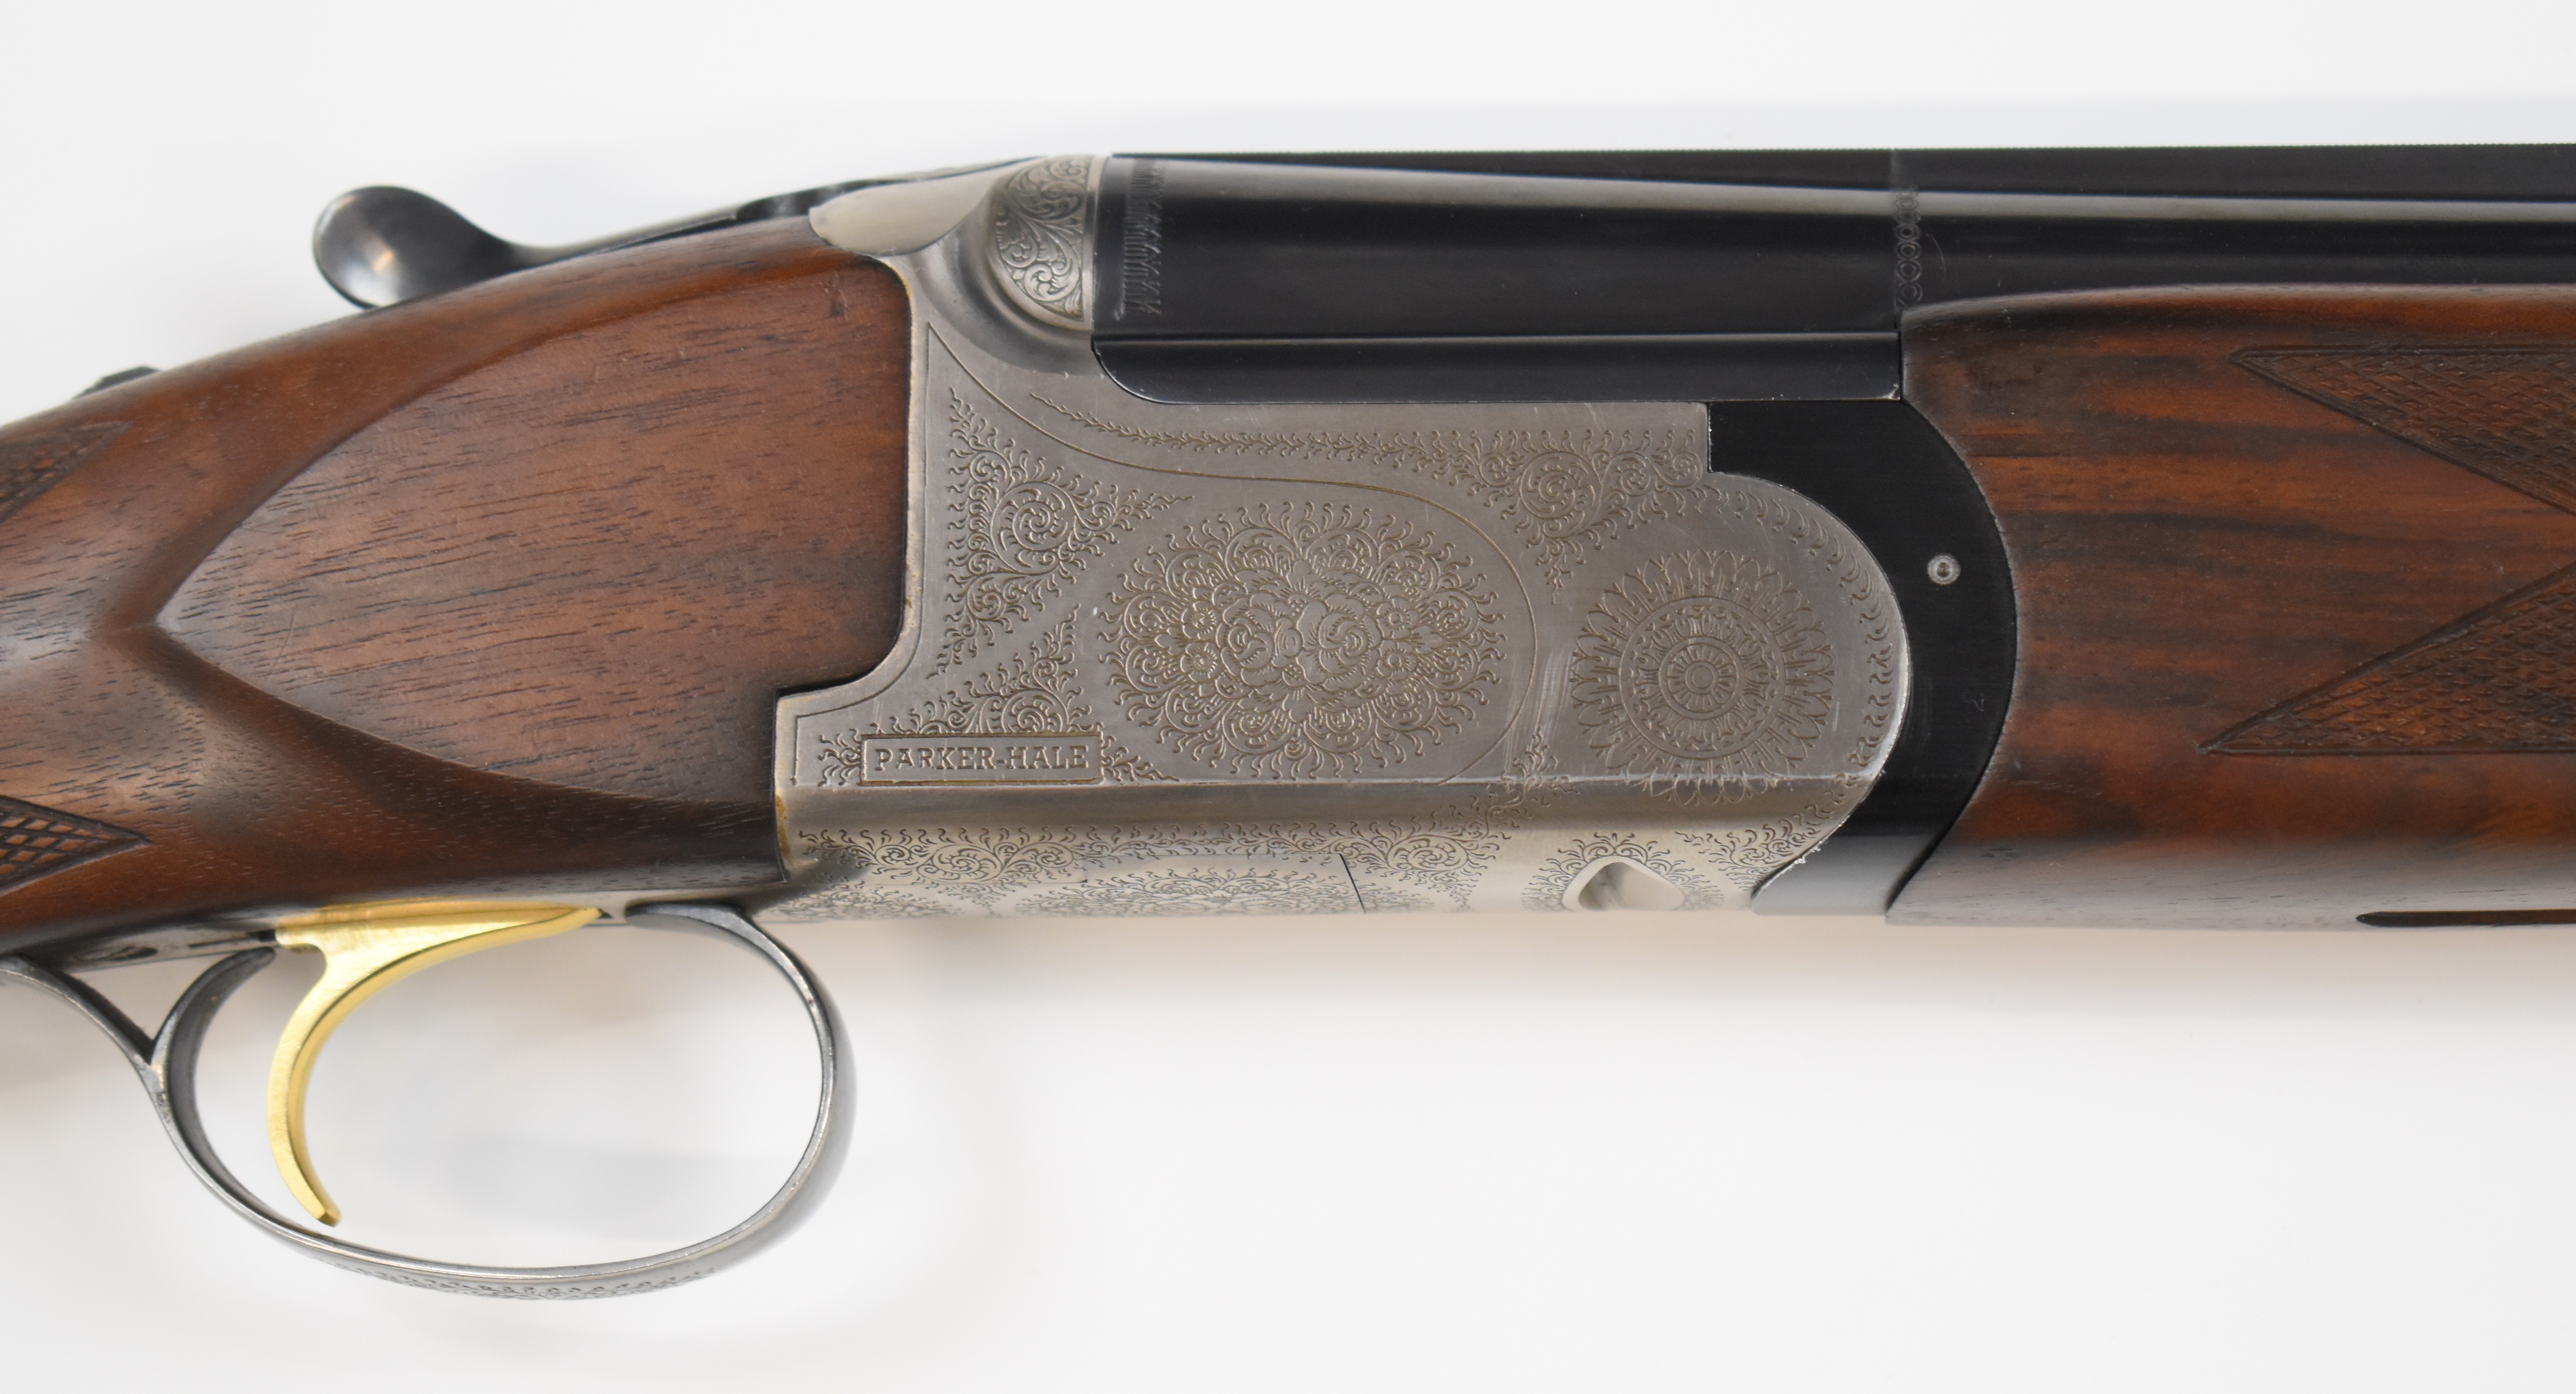 Parker-Hale 12 bore over and under ejector shotgun with named and engraved lock, engraved trigger - Image 6 of 10